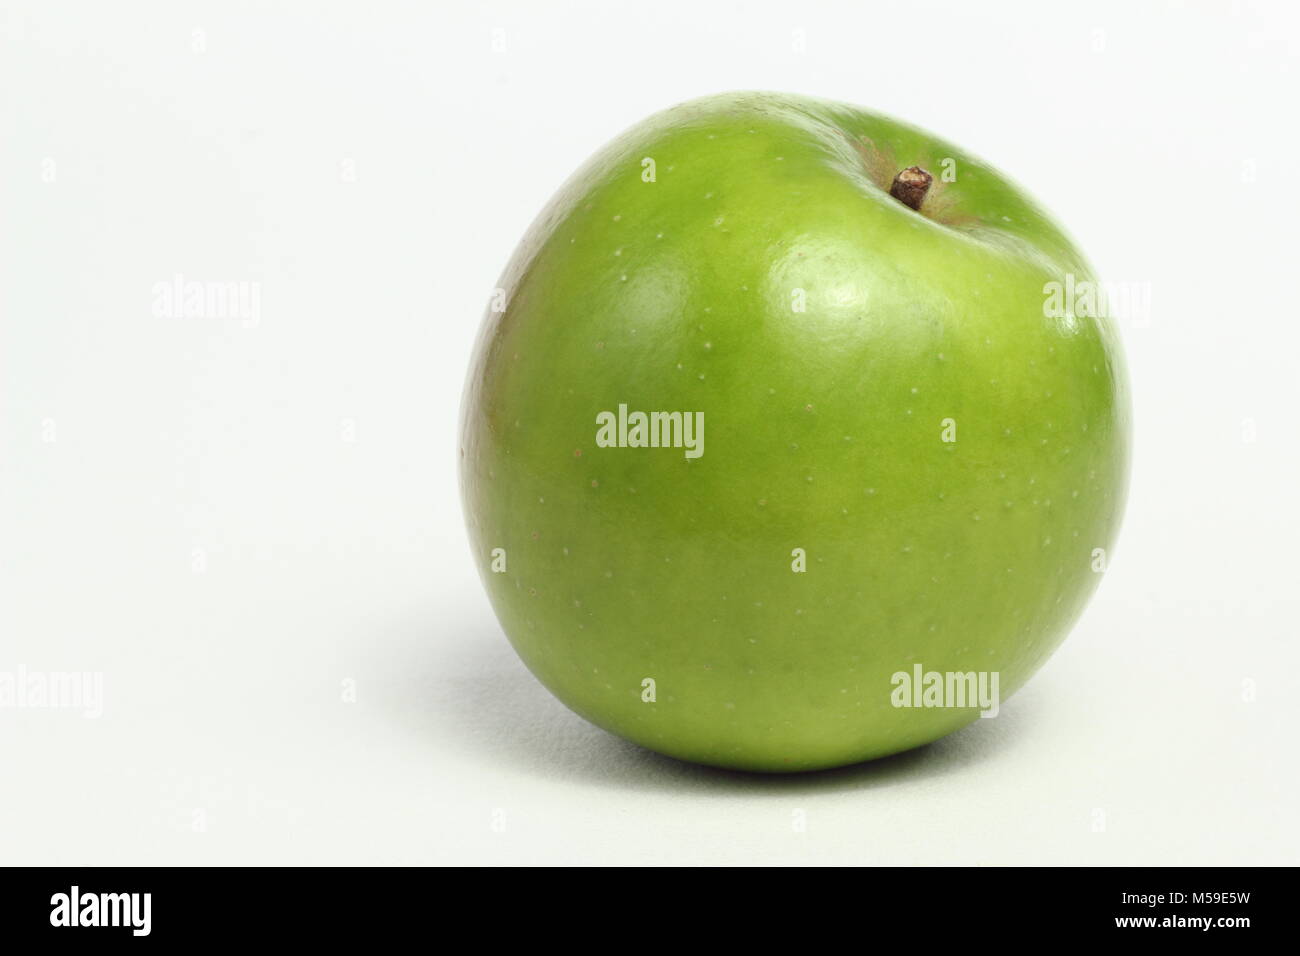 Malus domestica 'Green Balsam', an heirloom English apple variety, white background, UK Stock Photo